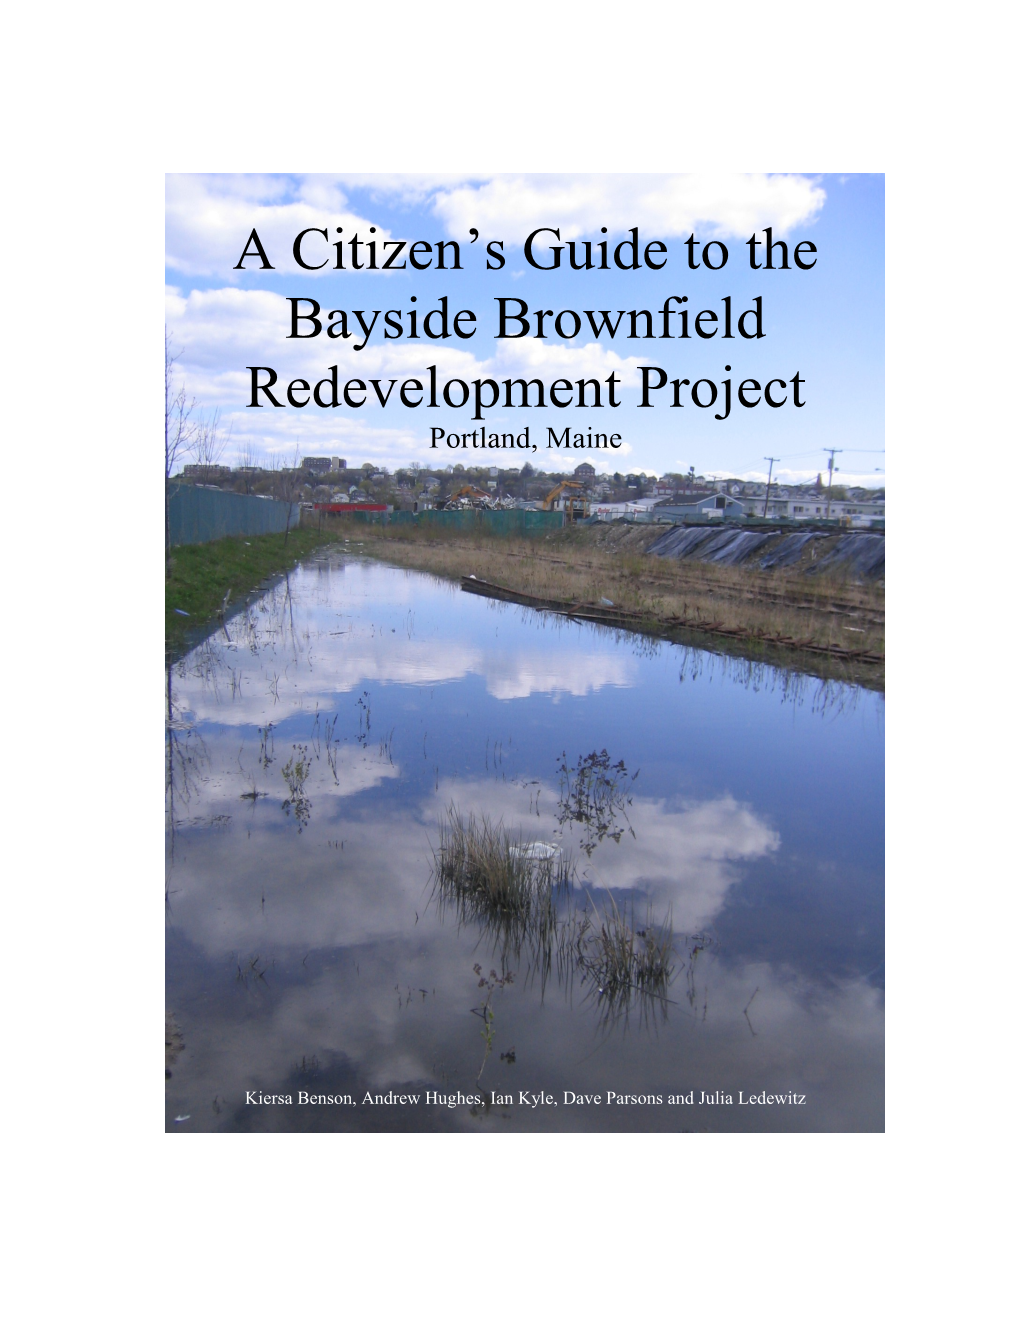 Barriers to and Benefits of Brownfield Redevelopment